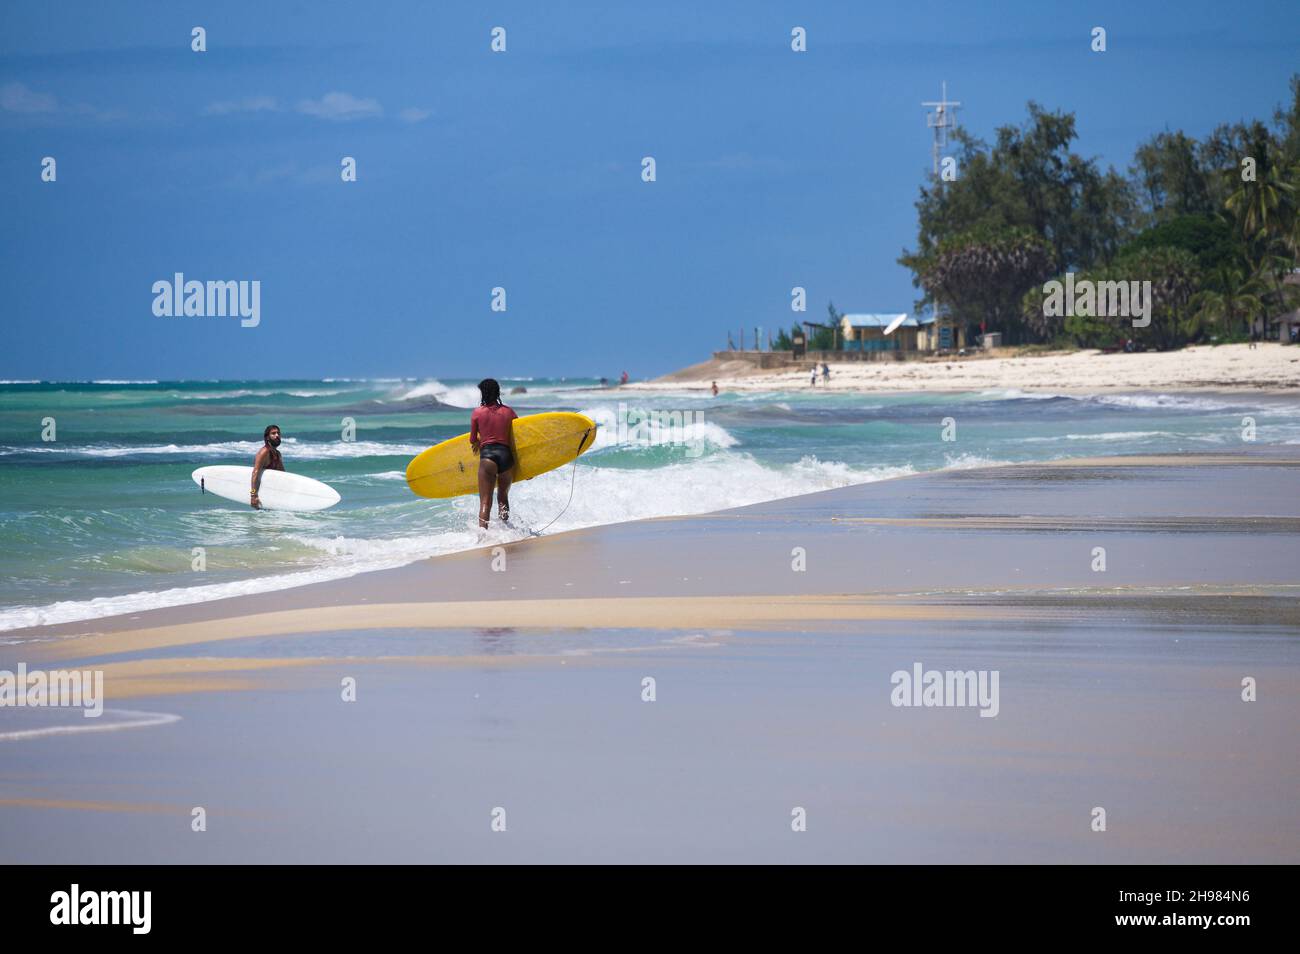 Two surfers walking out of the ocean as waves break on the beach, Diani, Kenya Stock Photo